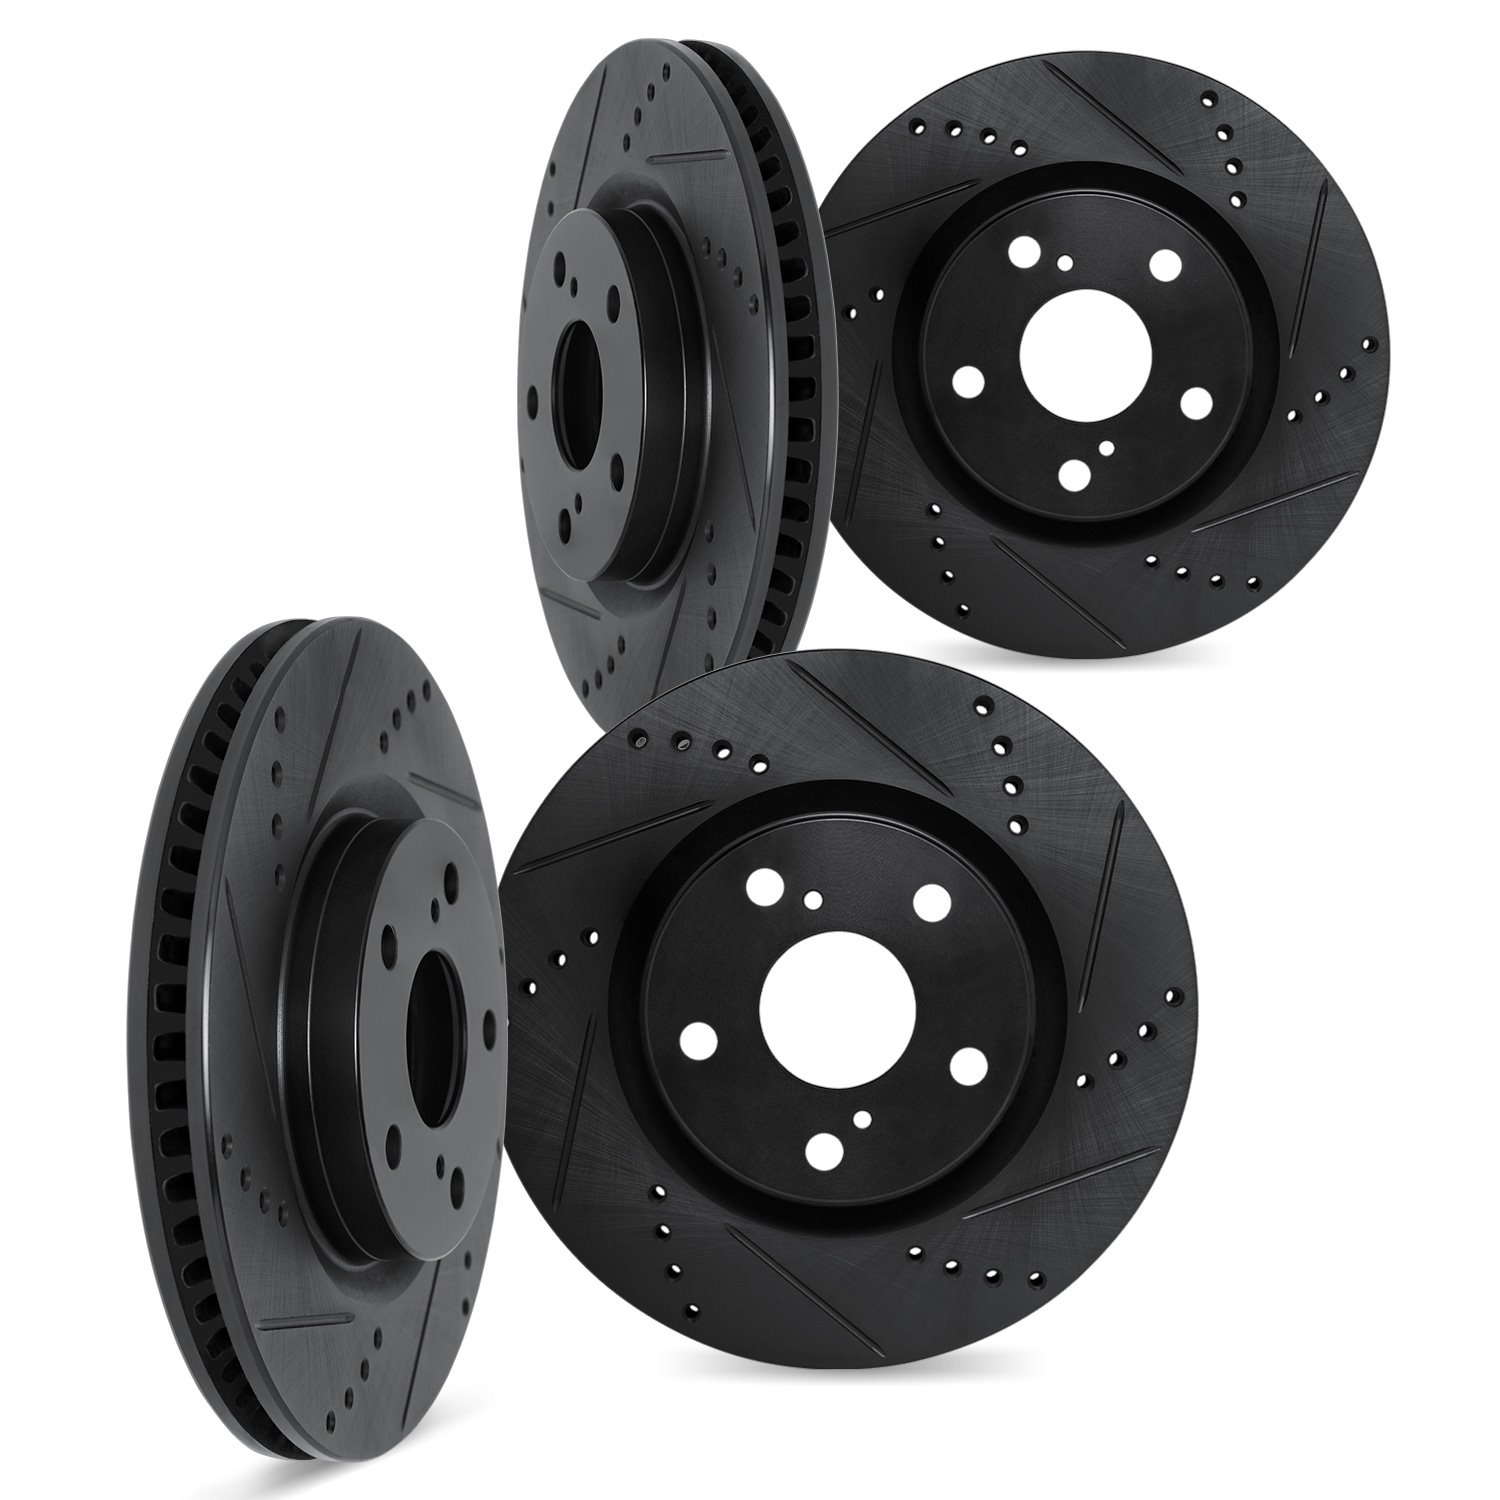 8004-31086 Drilled/Slotted Brake Rotors [Black], Fits Select Multiple Makes/Models, Position: Front and Rear